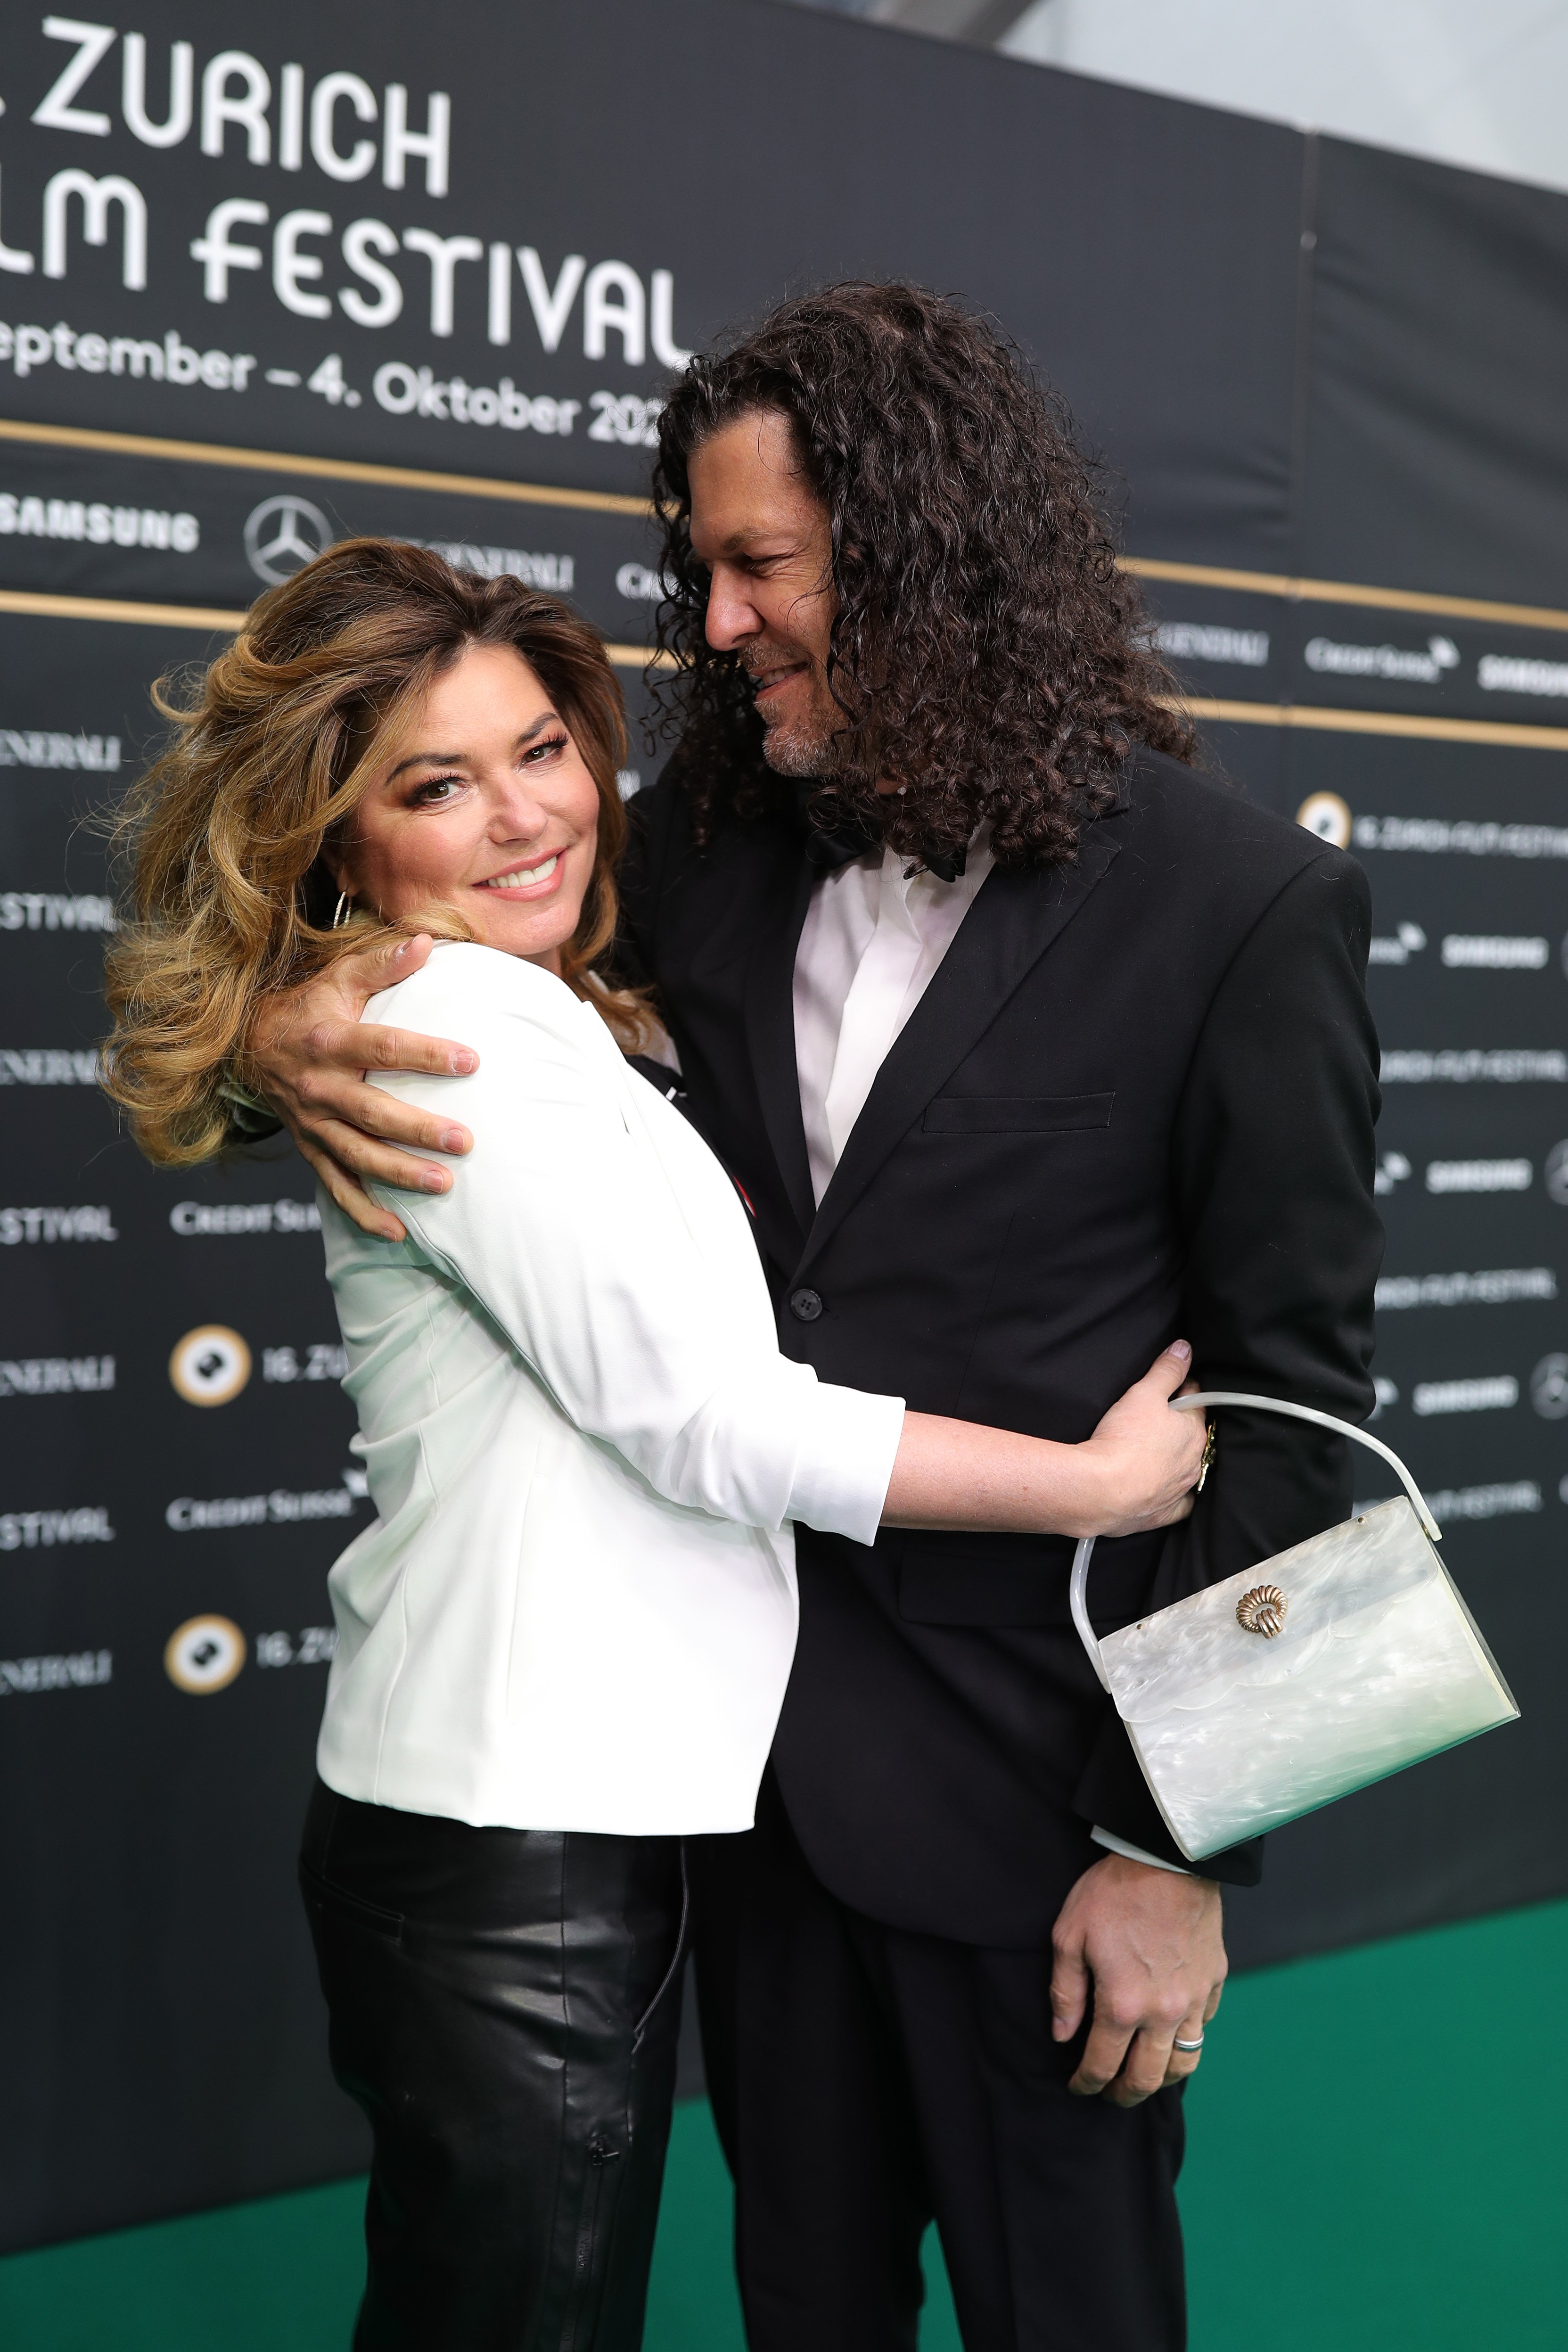 Shania Twain and her husband Frédéric Thiébaud attend the "Who you gonna call" photocall during the 16th Zurich Film Festival at Kino Corso on September 26, 2020, in Zurich, Switzerland. | Source: Getty Images